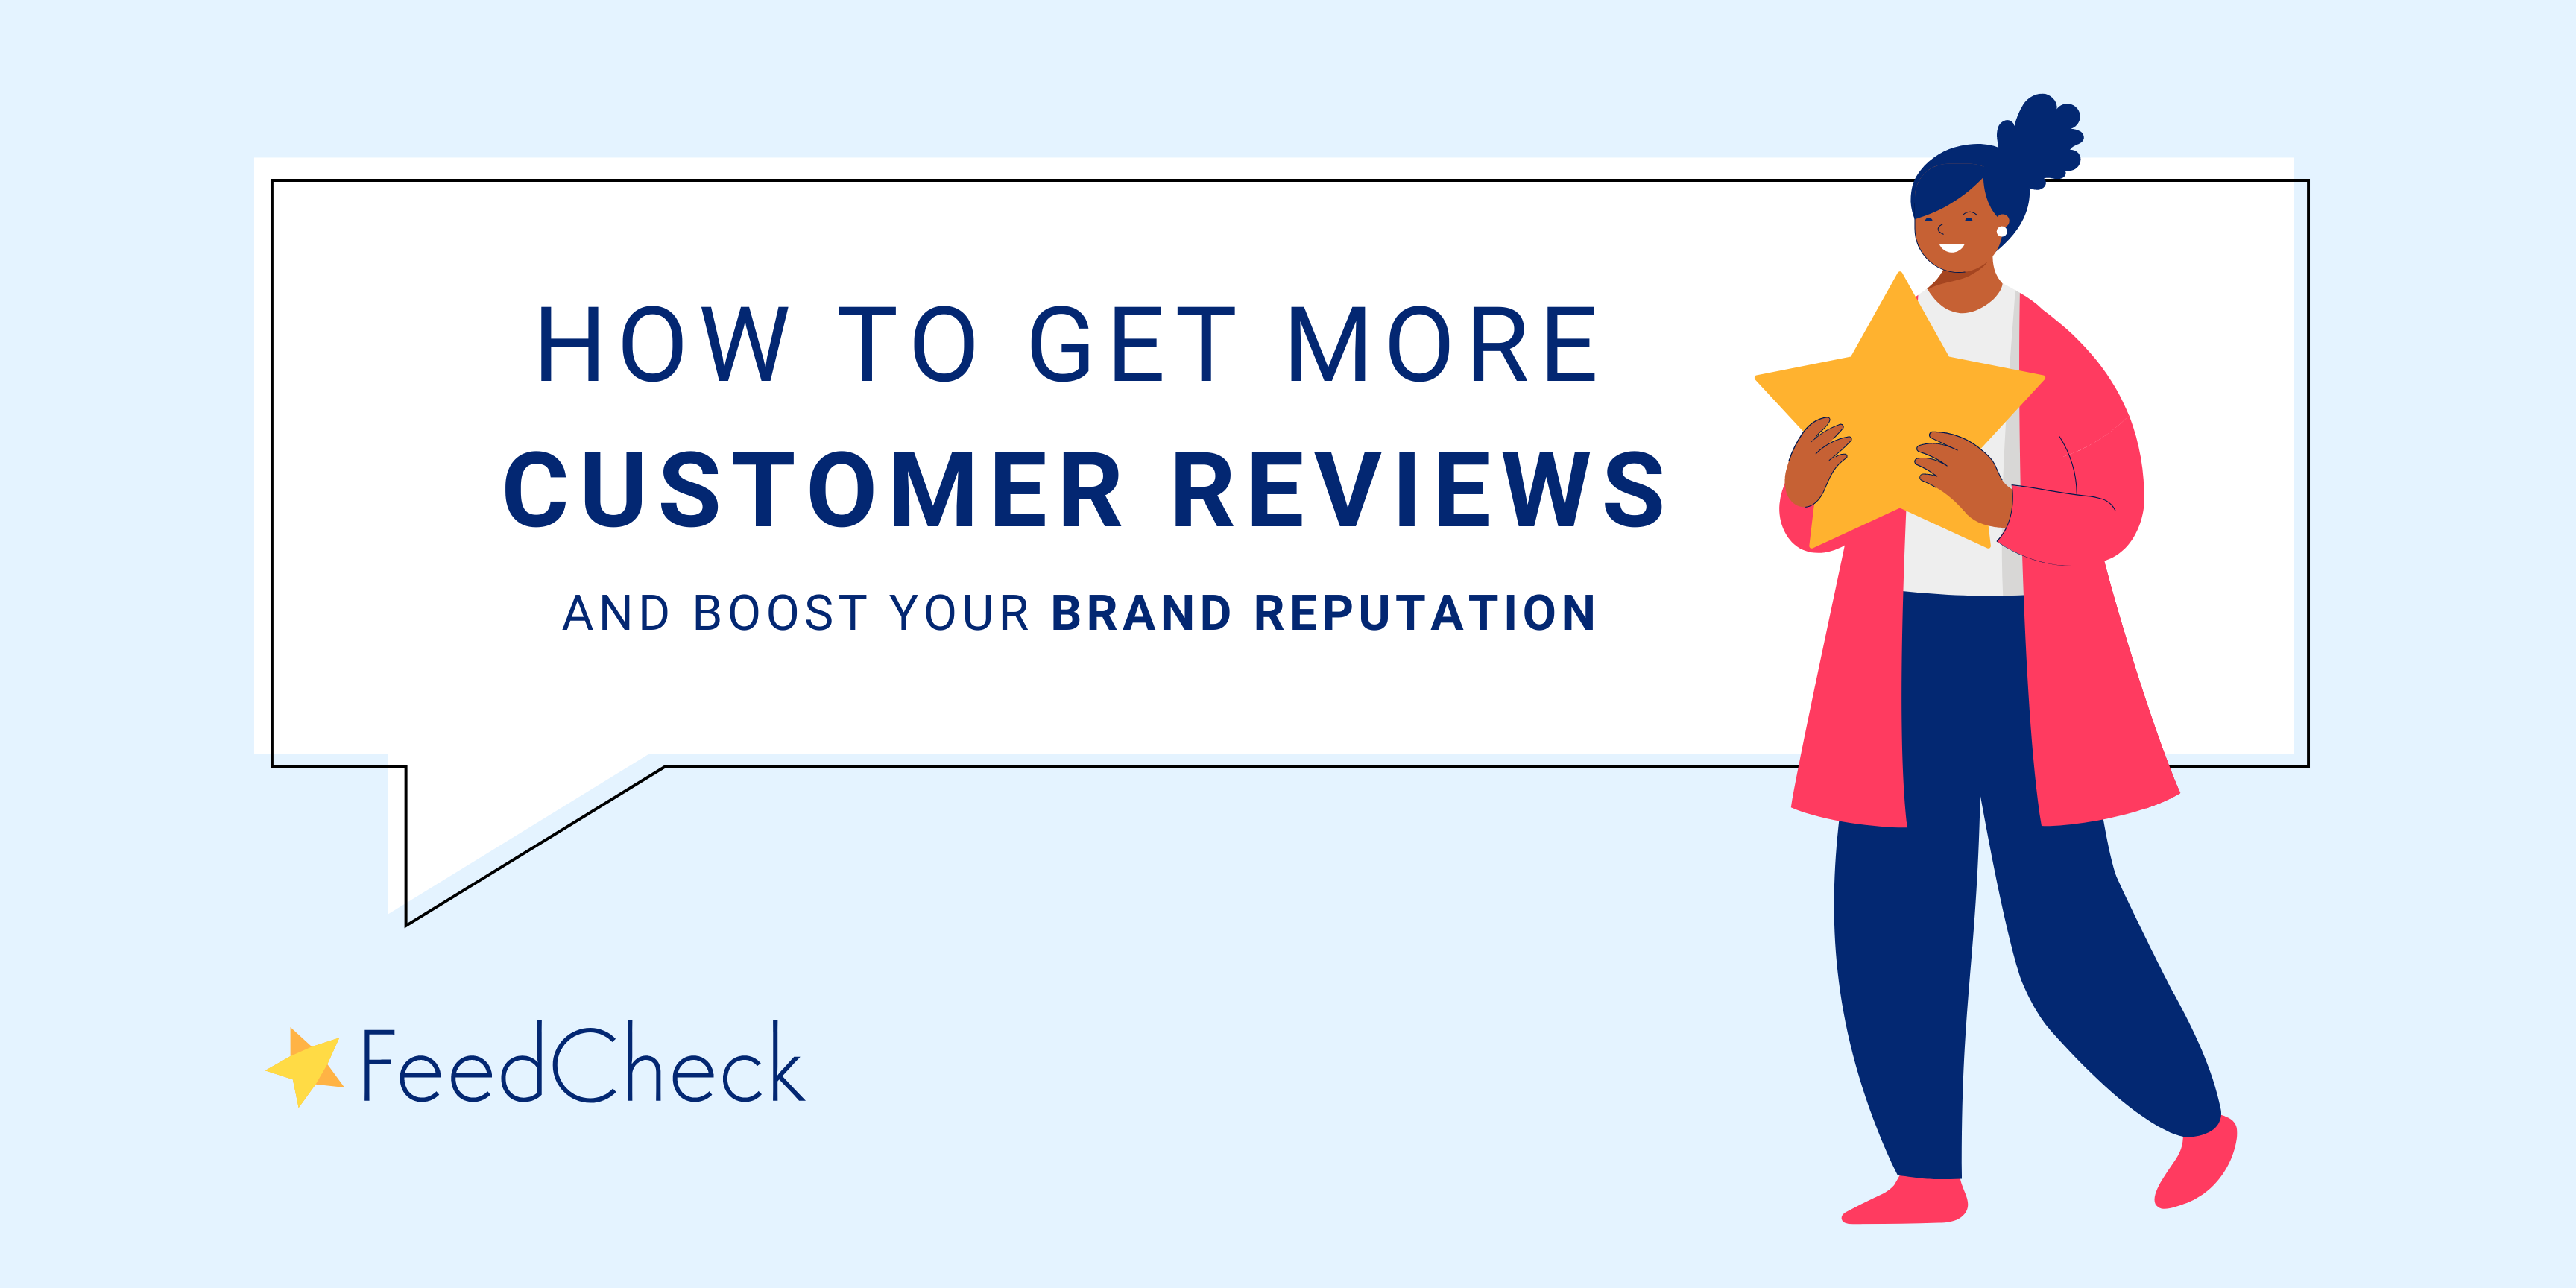 How to get more customer reviews and boost your brand reputation